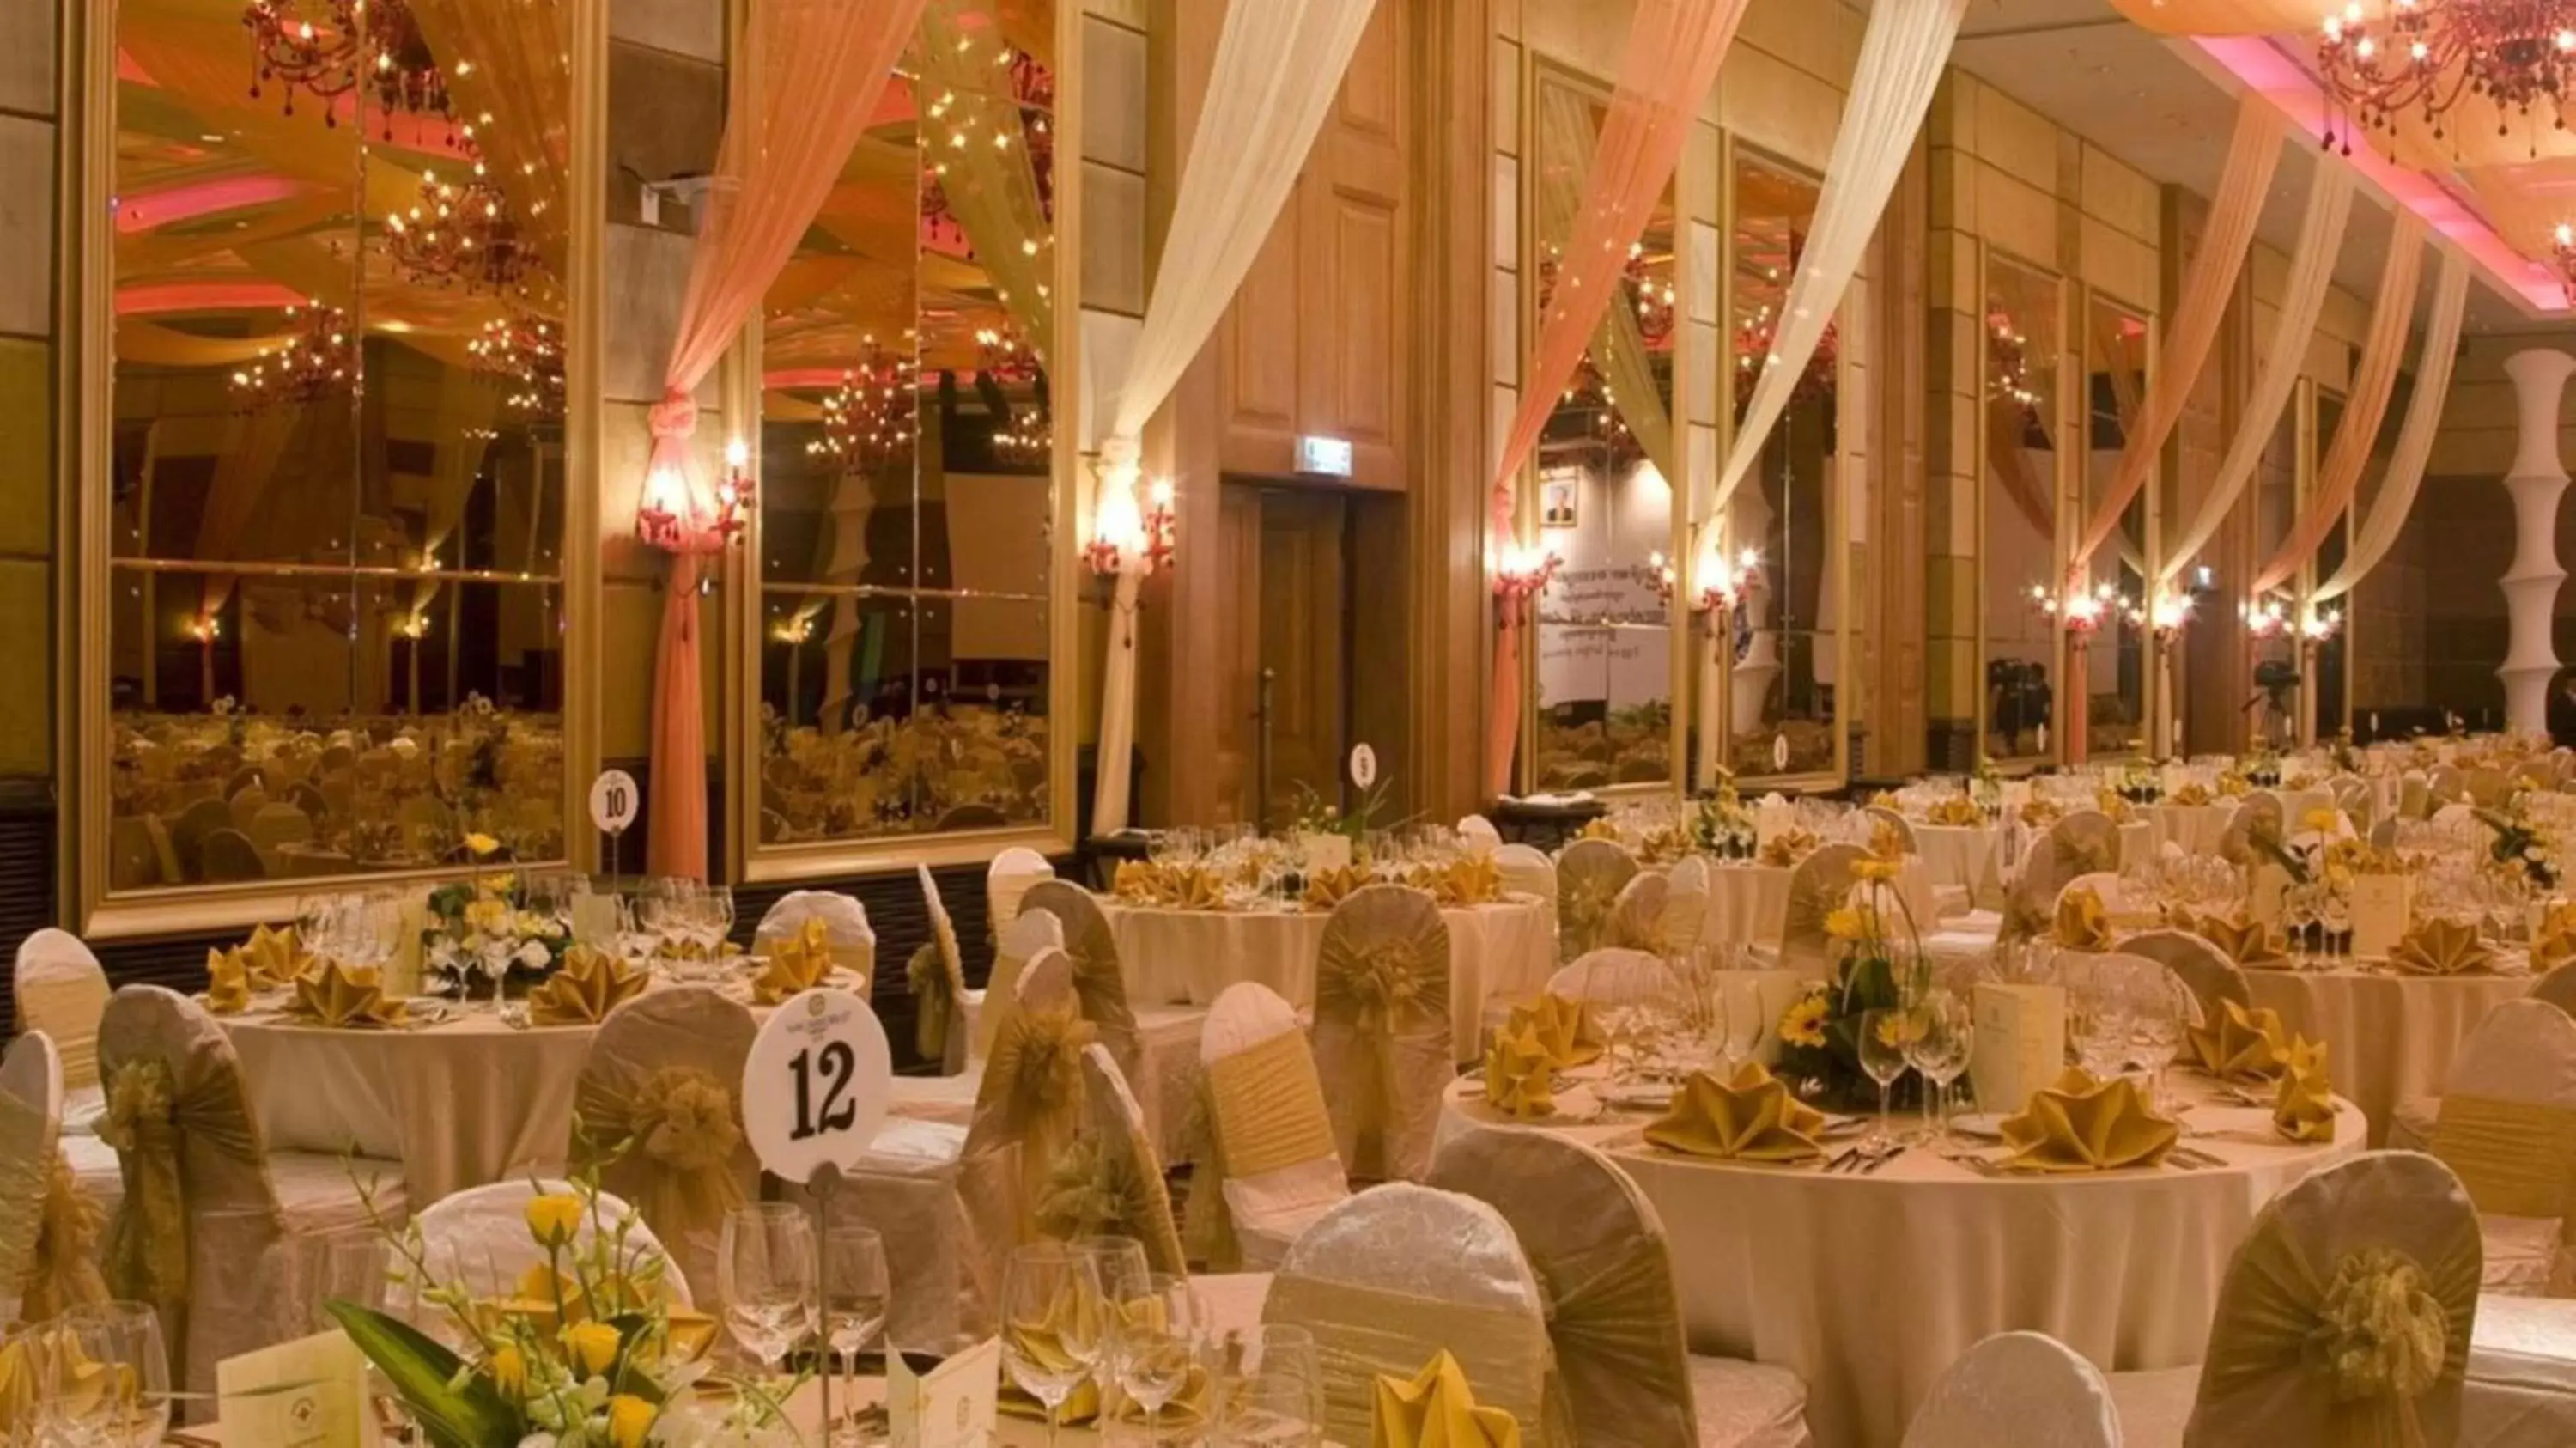 Banquet/Function facilities, Banquet Facilities in NagaWorld Hotel & Entertainment Complex